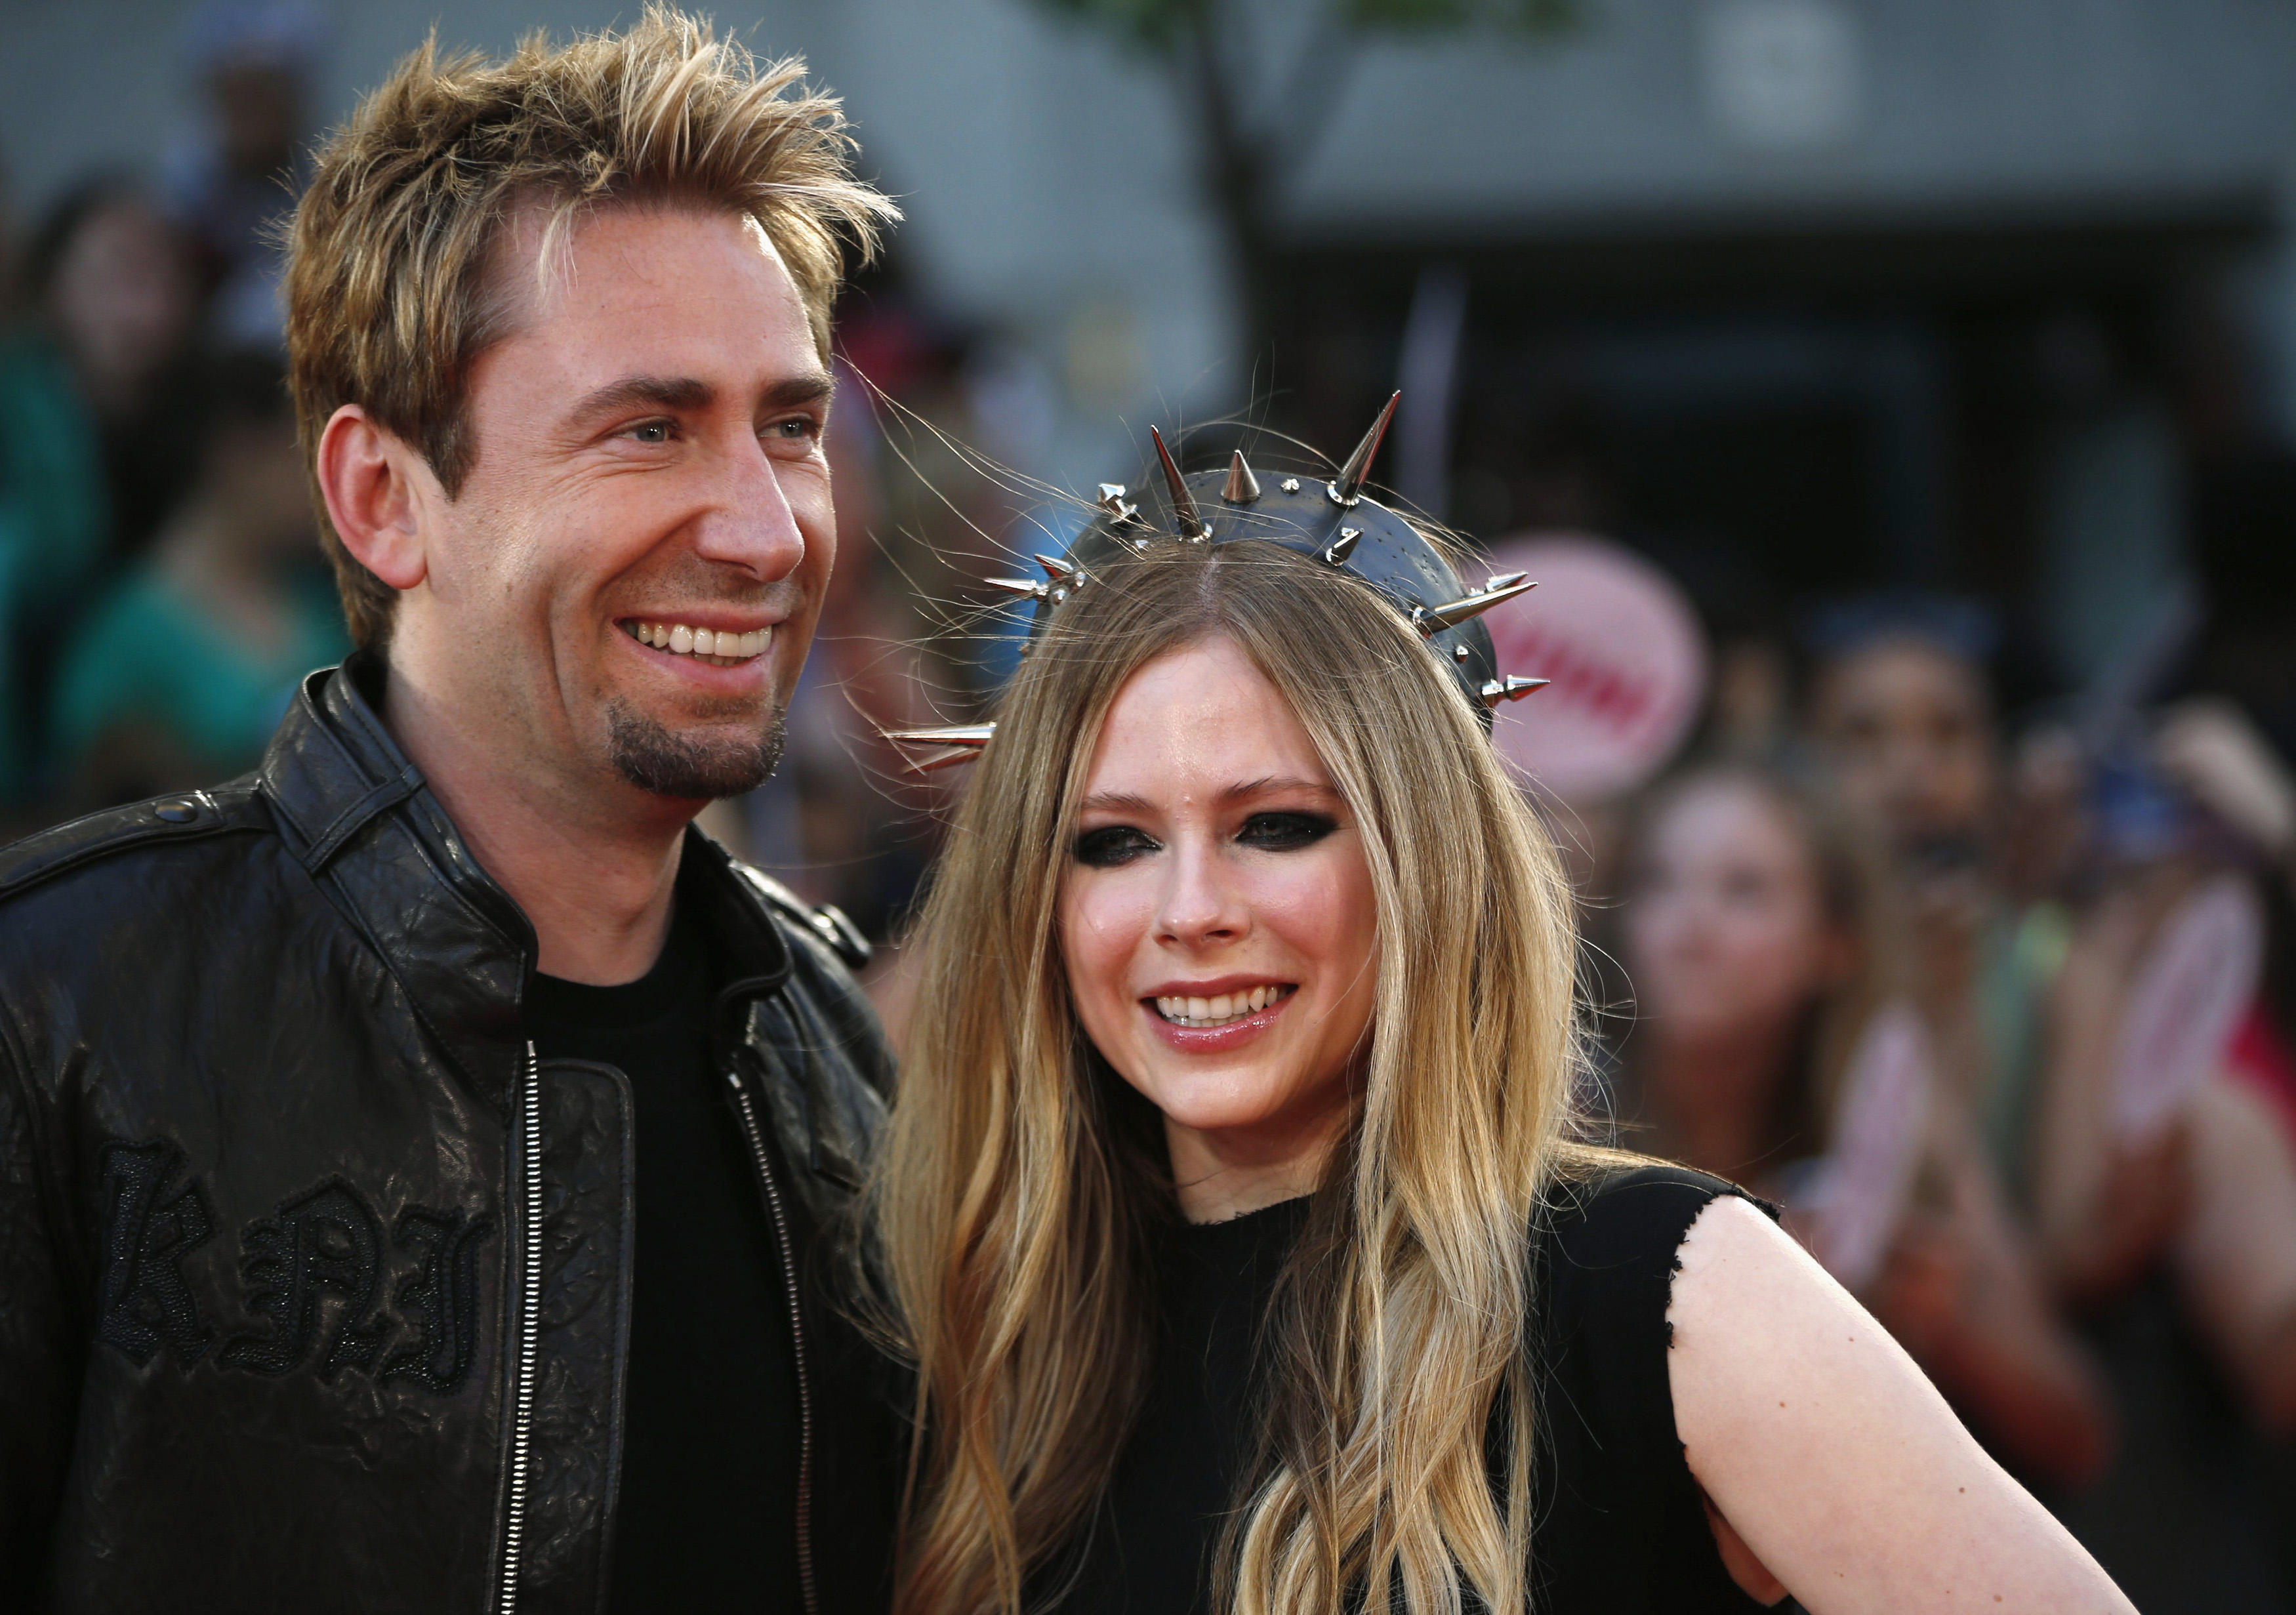 Singers Avril Lavigne and Chad Kroeger arrive on the red carpet for the MuchMusic Video Awards (MMVAs) in Toronto, June 16, 2013. REUTERS/Mark Blinch (CANADA - Tags: ENTERTAINMENT) - RTX10QB1